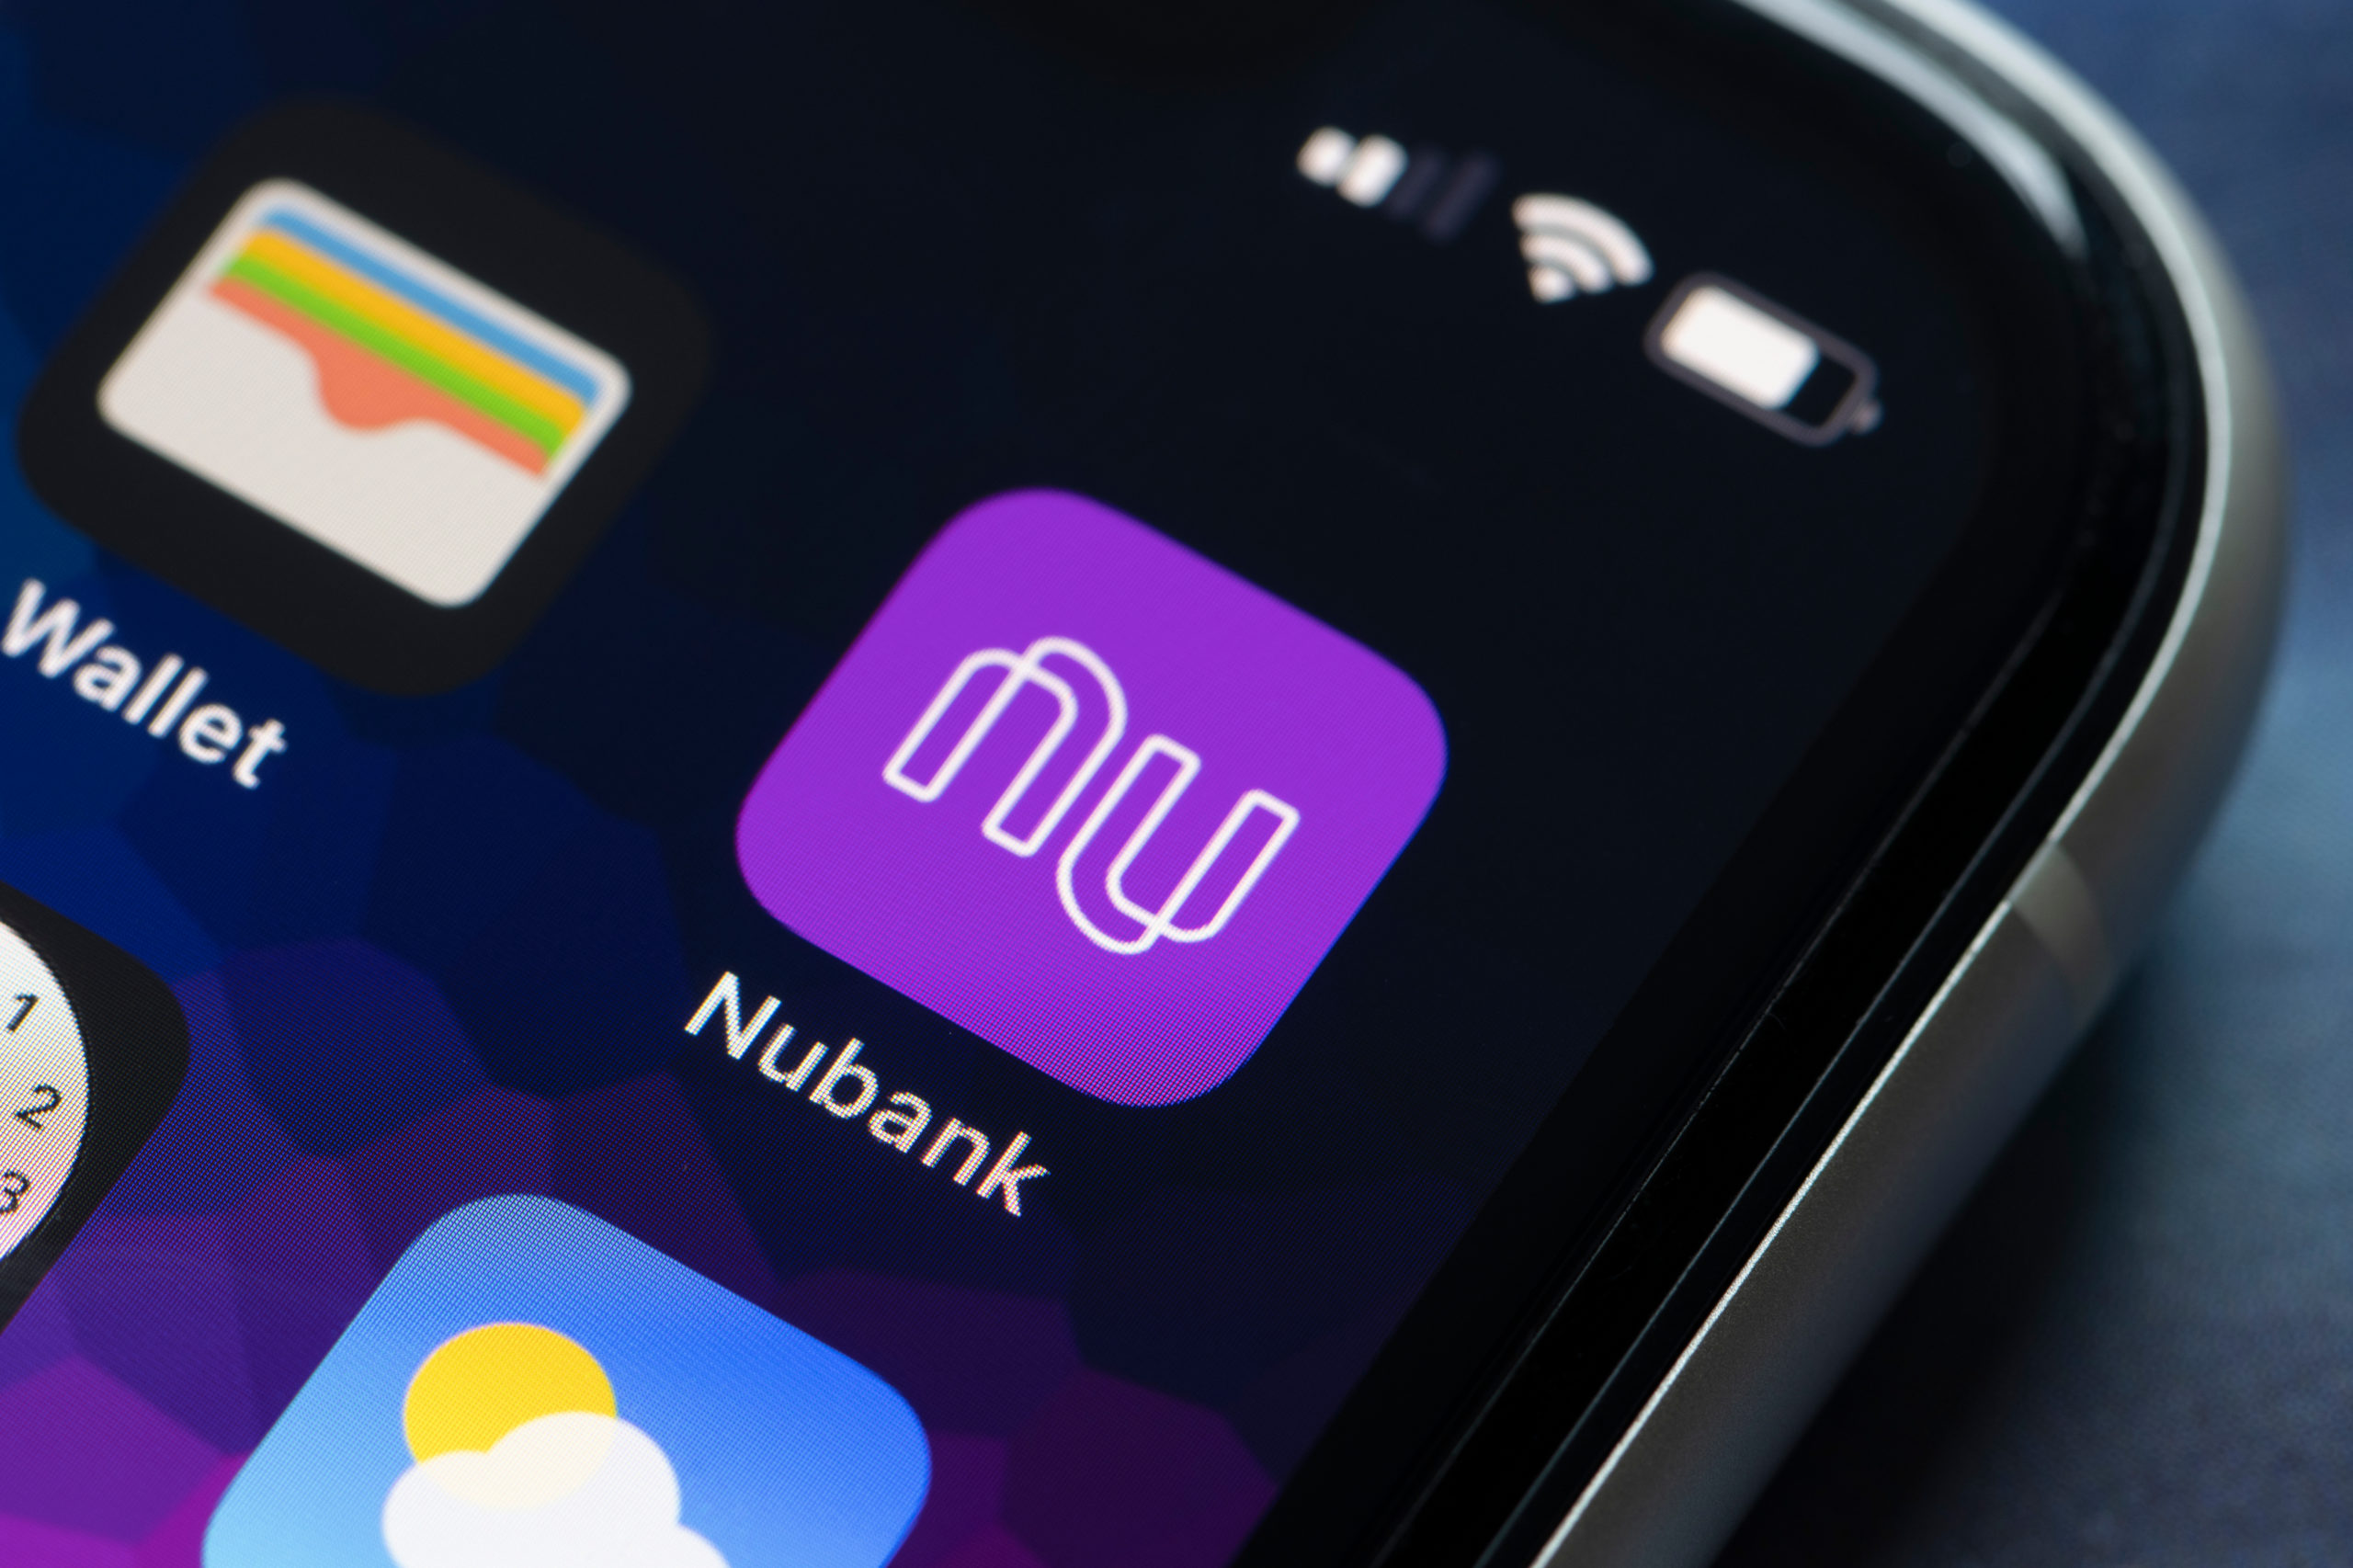 If you are a Nubank customer, you need to be aware of the bank’s risk alert